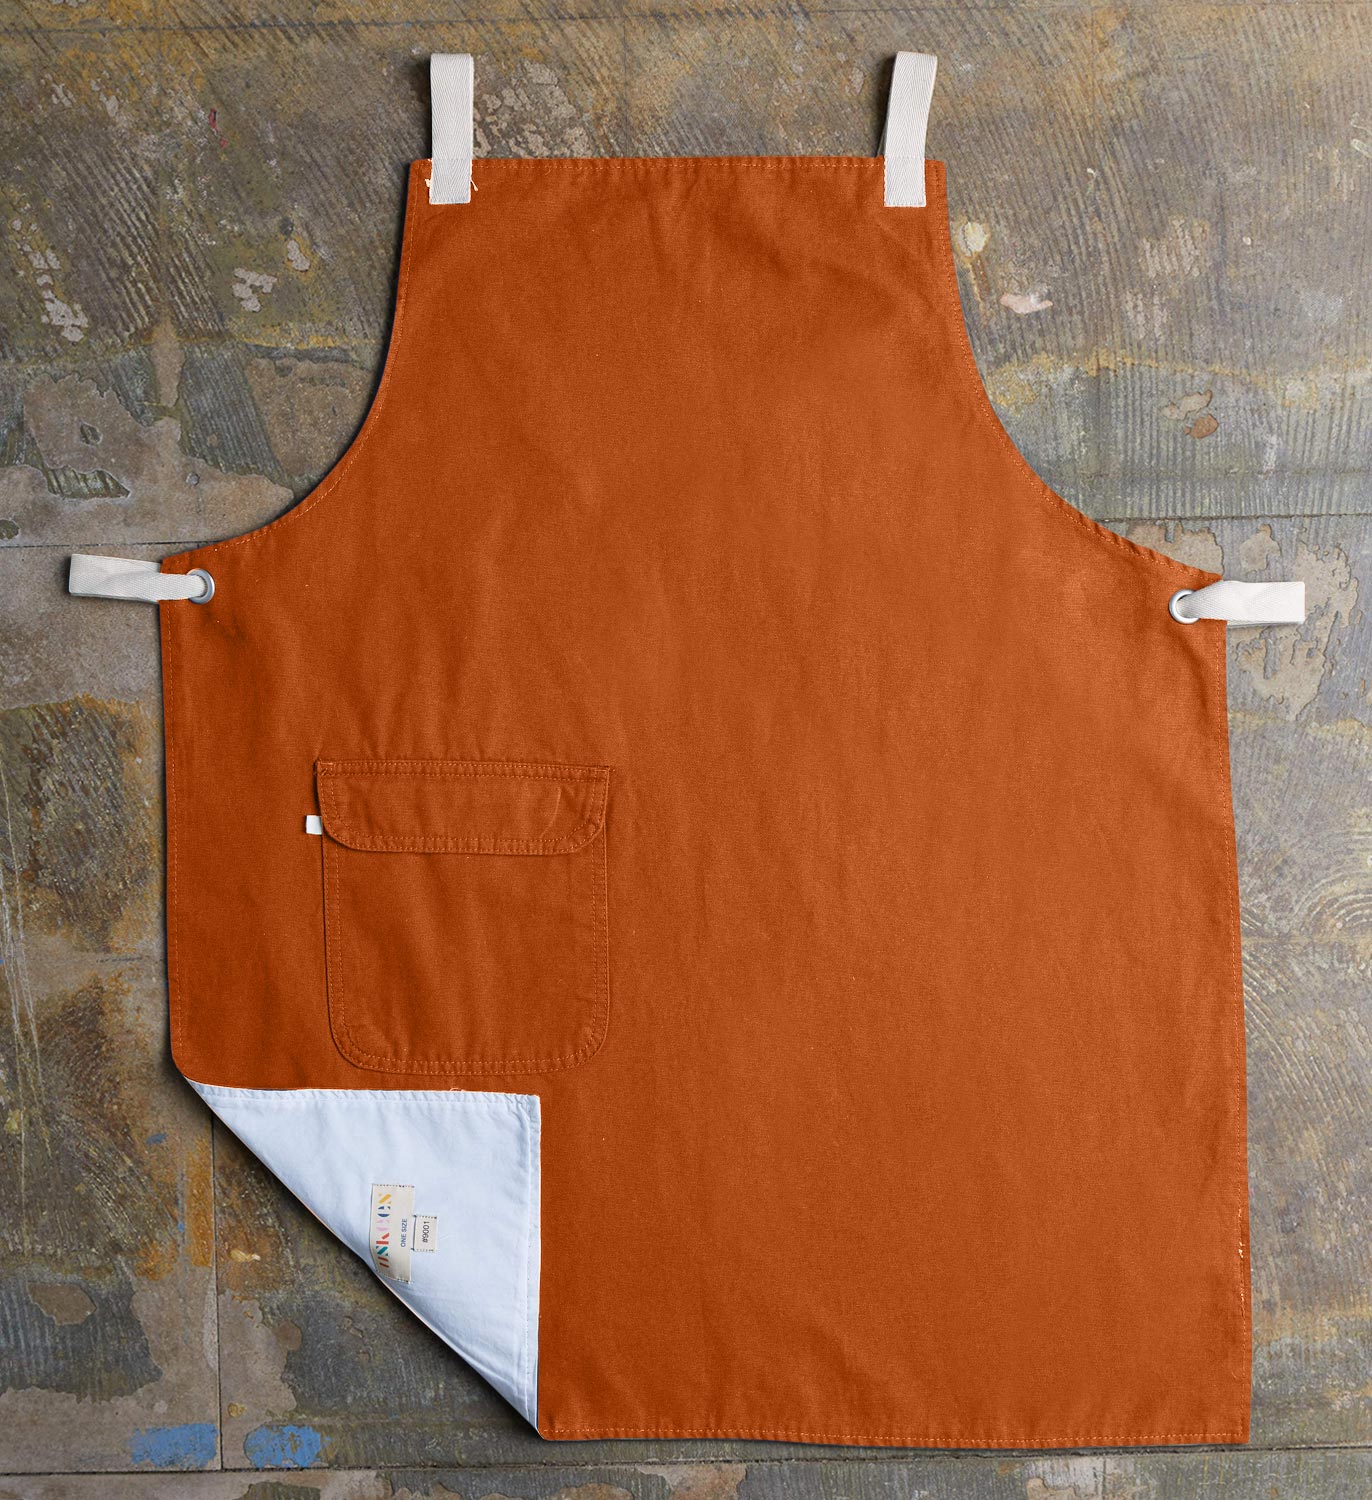 Full, flat view of gold-orange #9001 work apron with hip pocket by Uskees. Left corner folded up to reveal lining and 'Uskees' label.